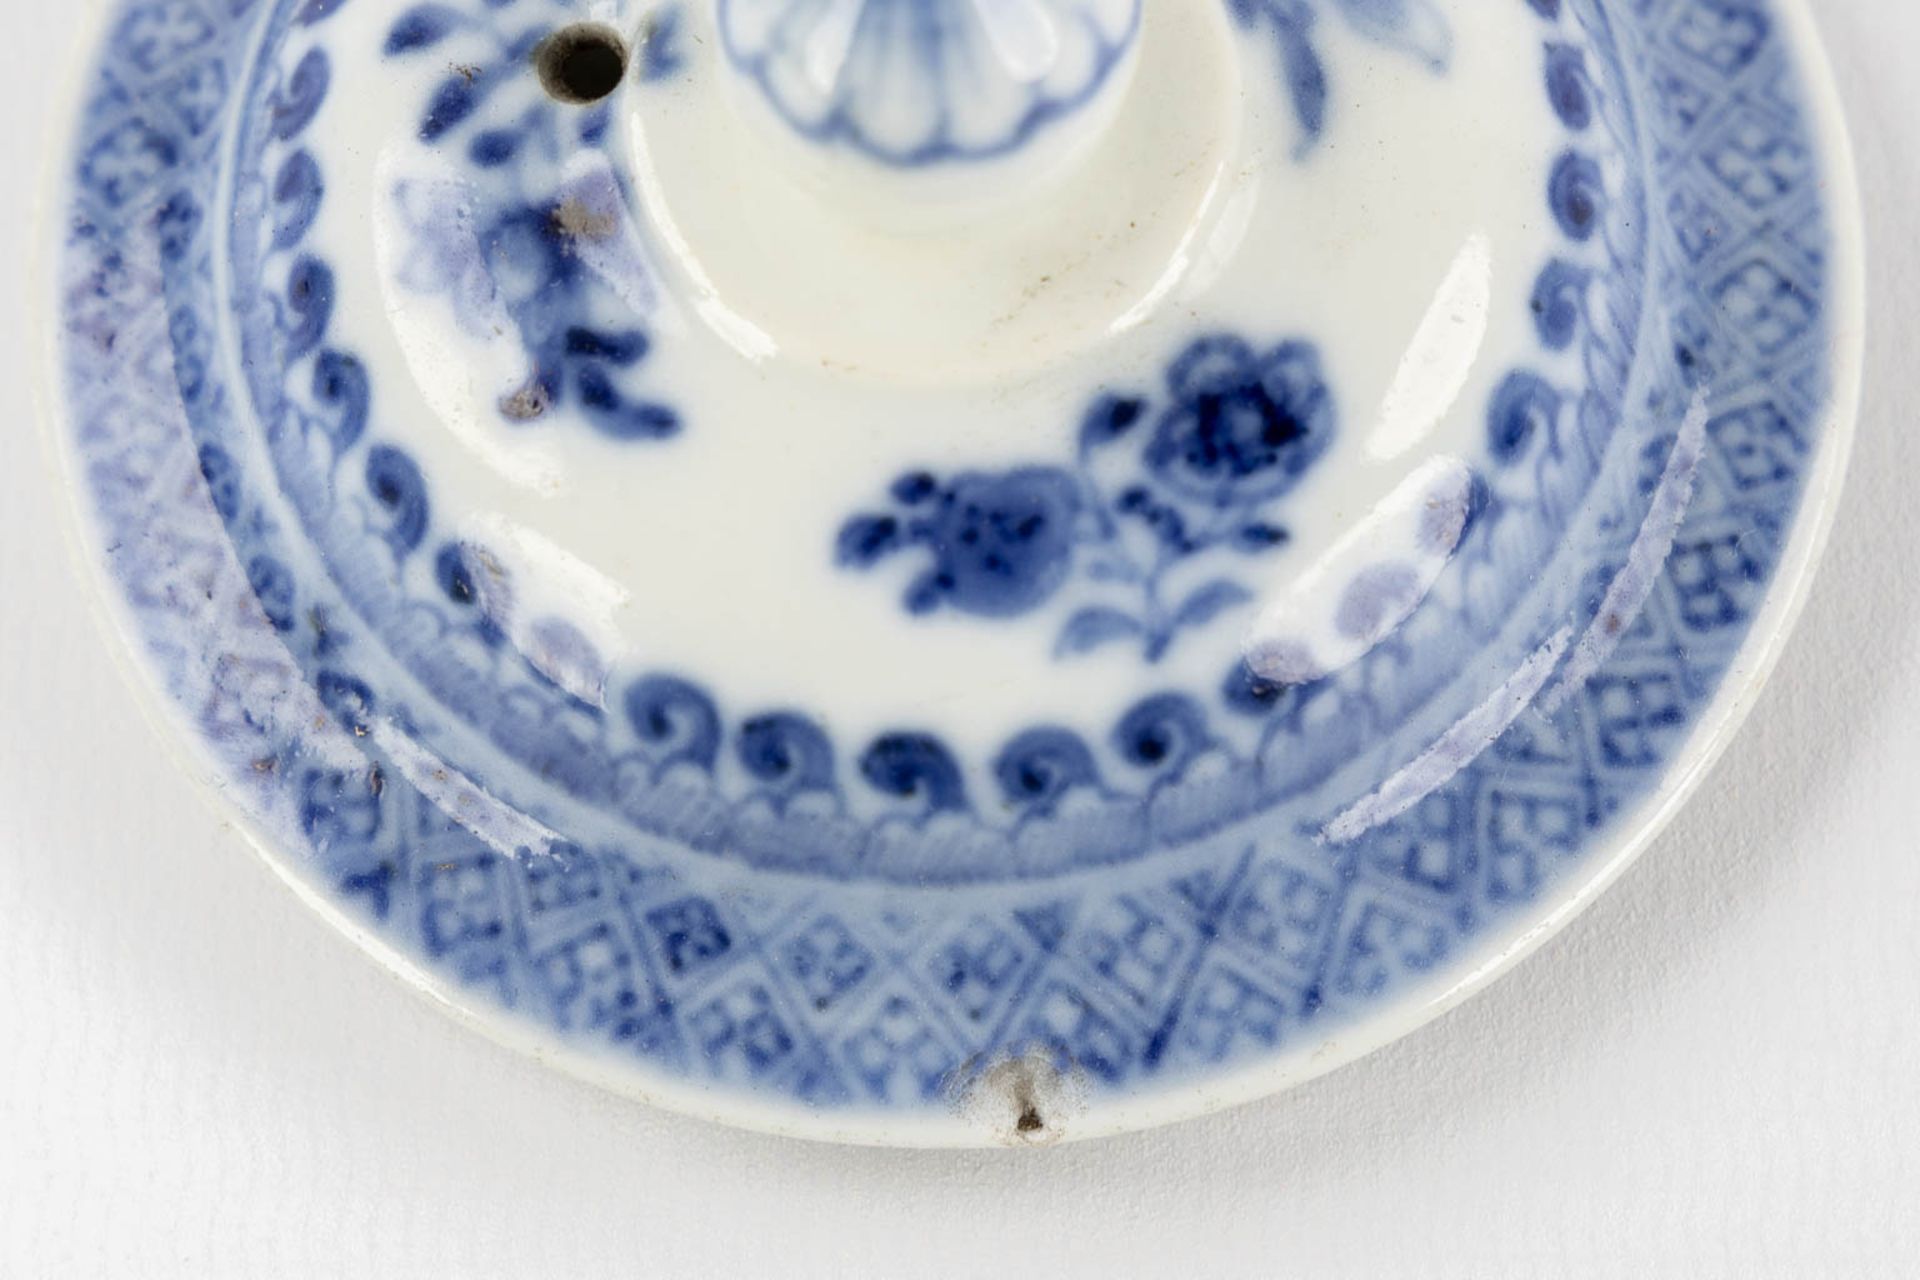 Three Chinese and Japanese teapots, blue-white decor. (W:20 x H:14 cm) - Image 12 of 17